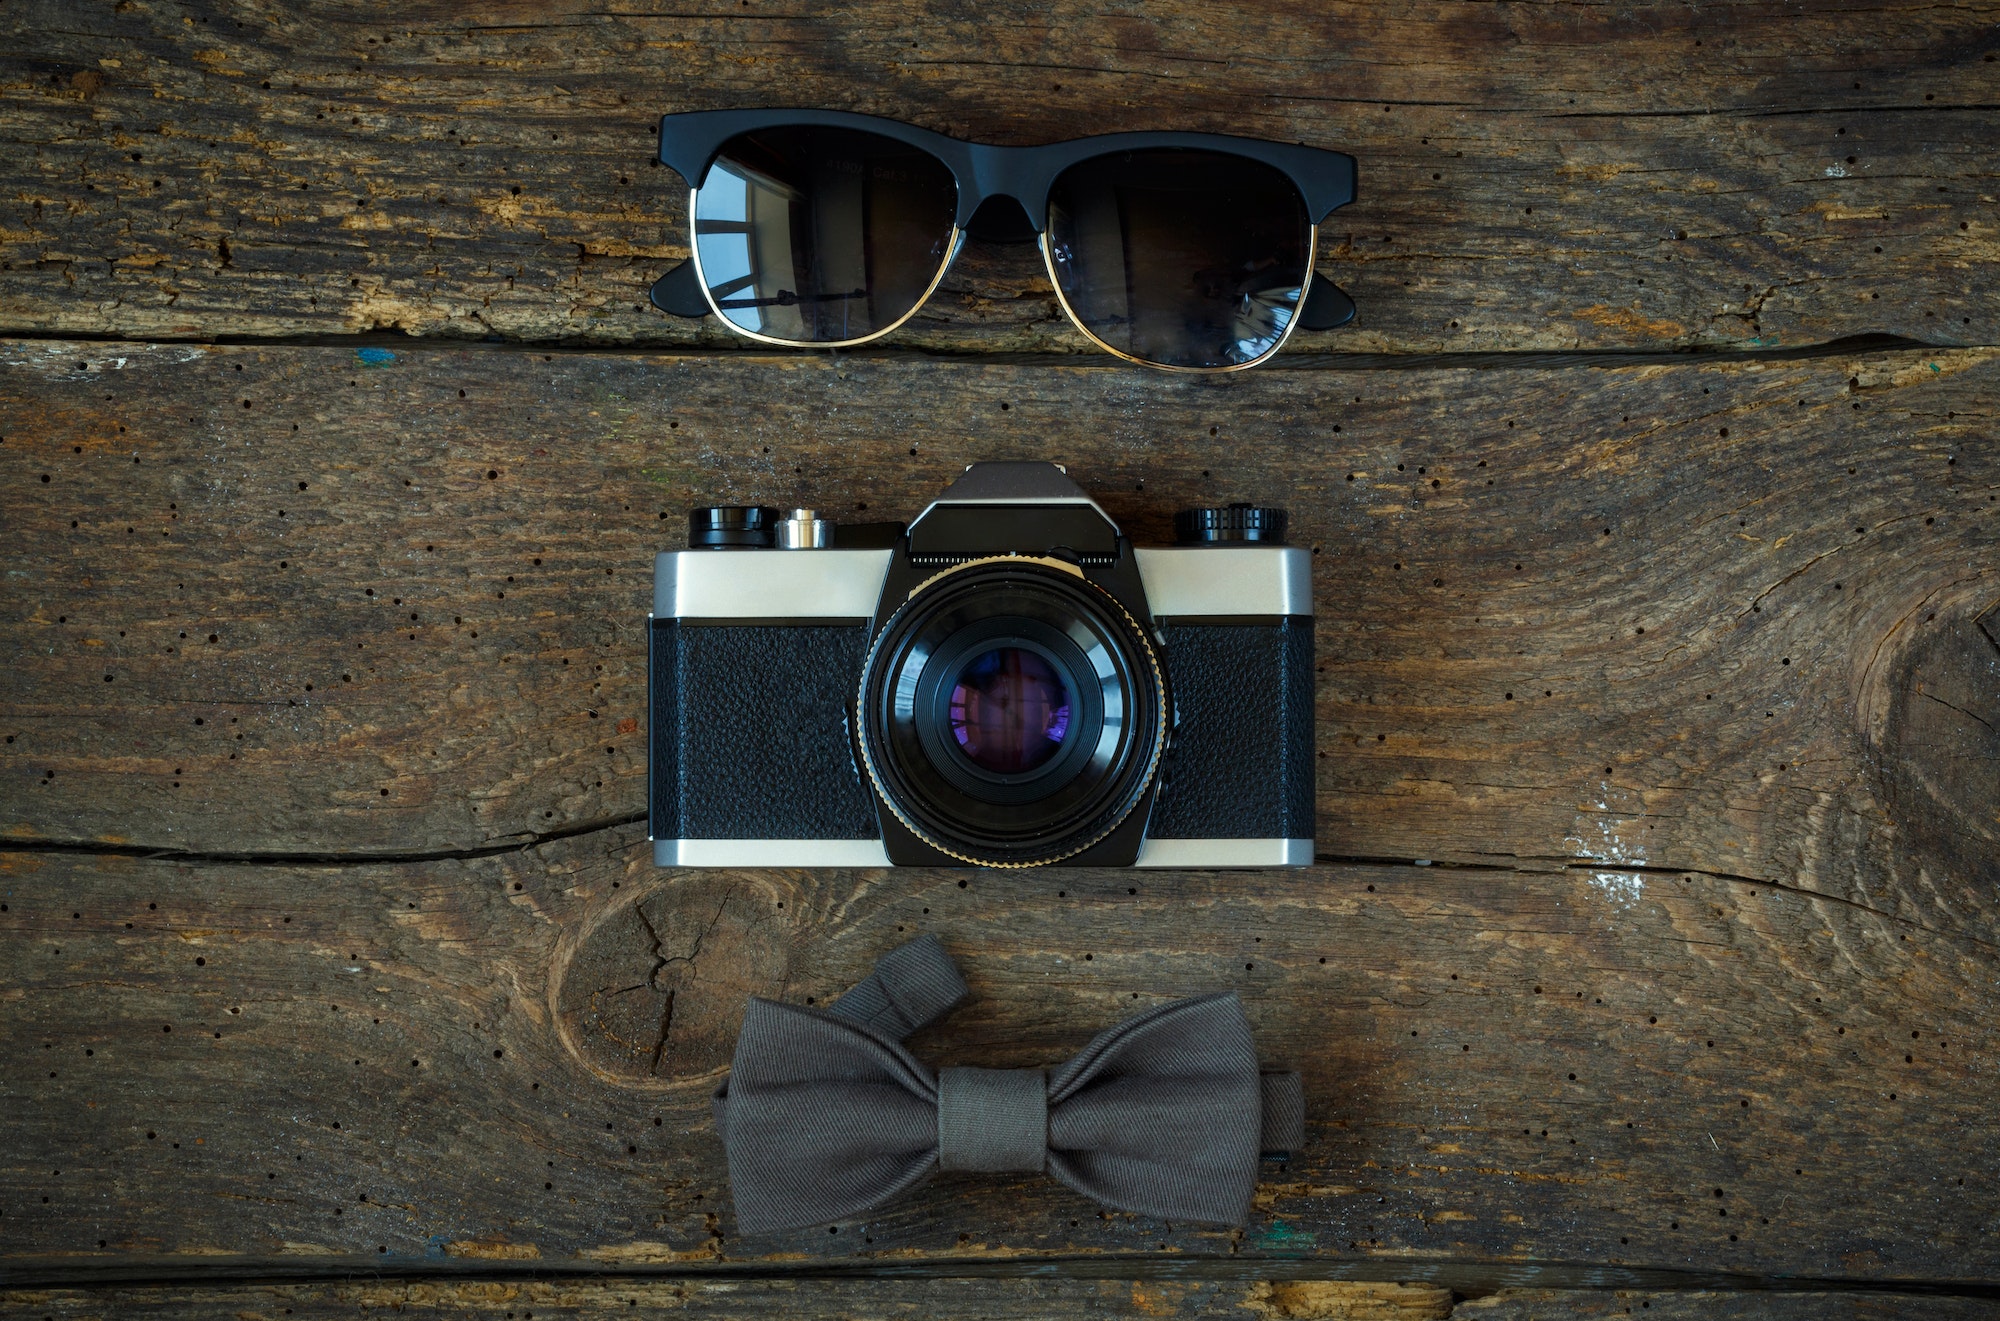 Sunglasses, old-fashioned camera and bow tie